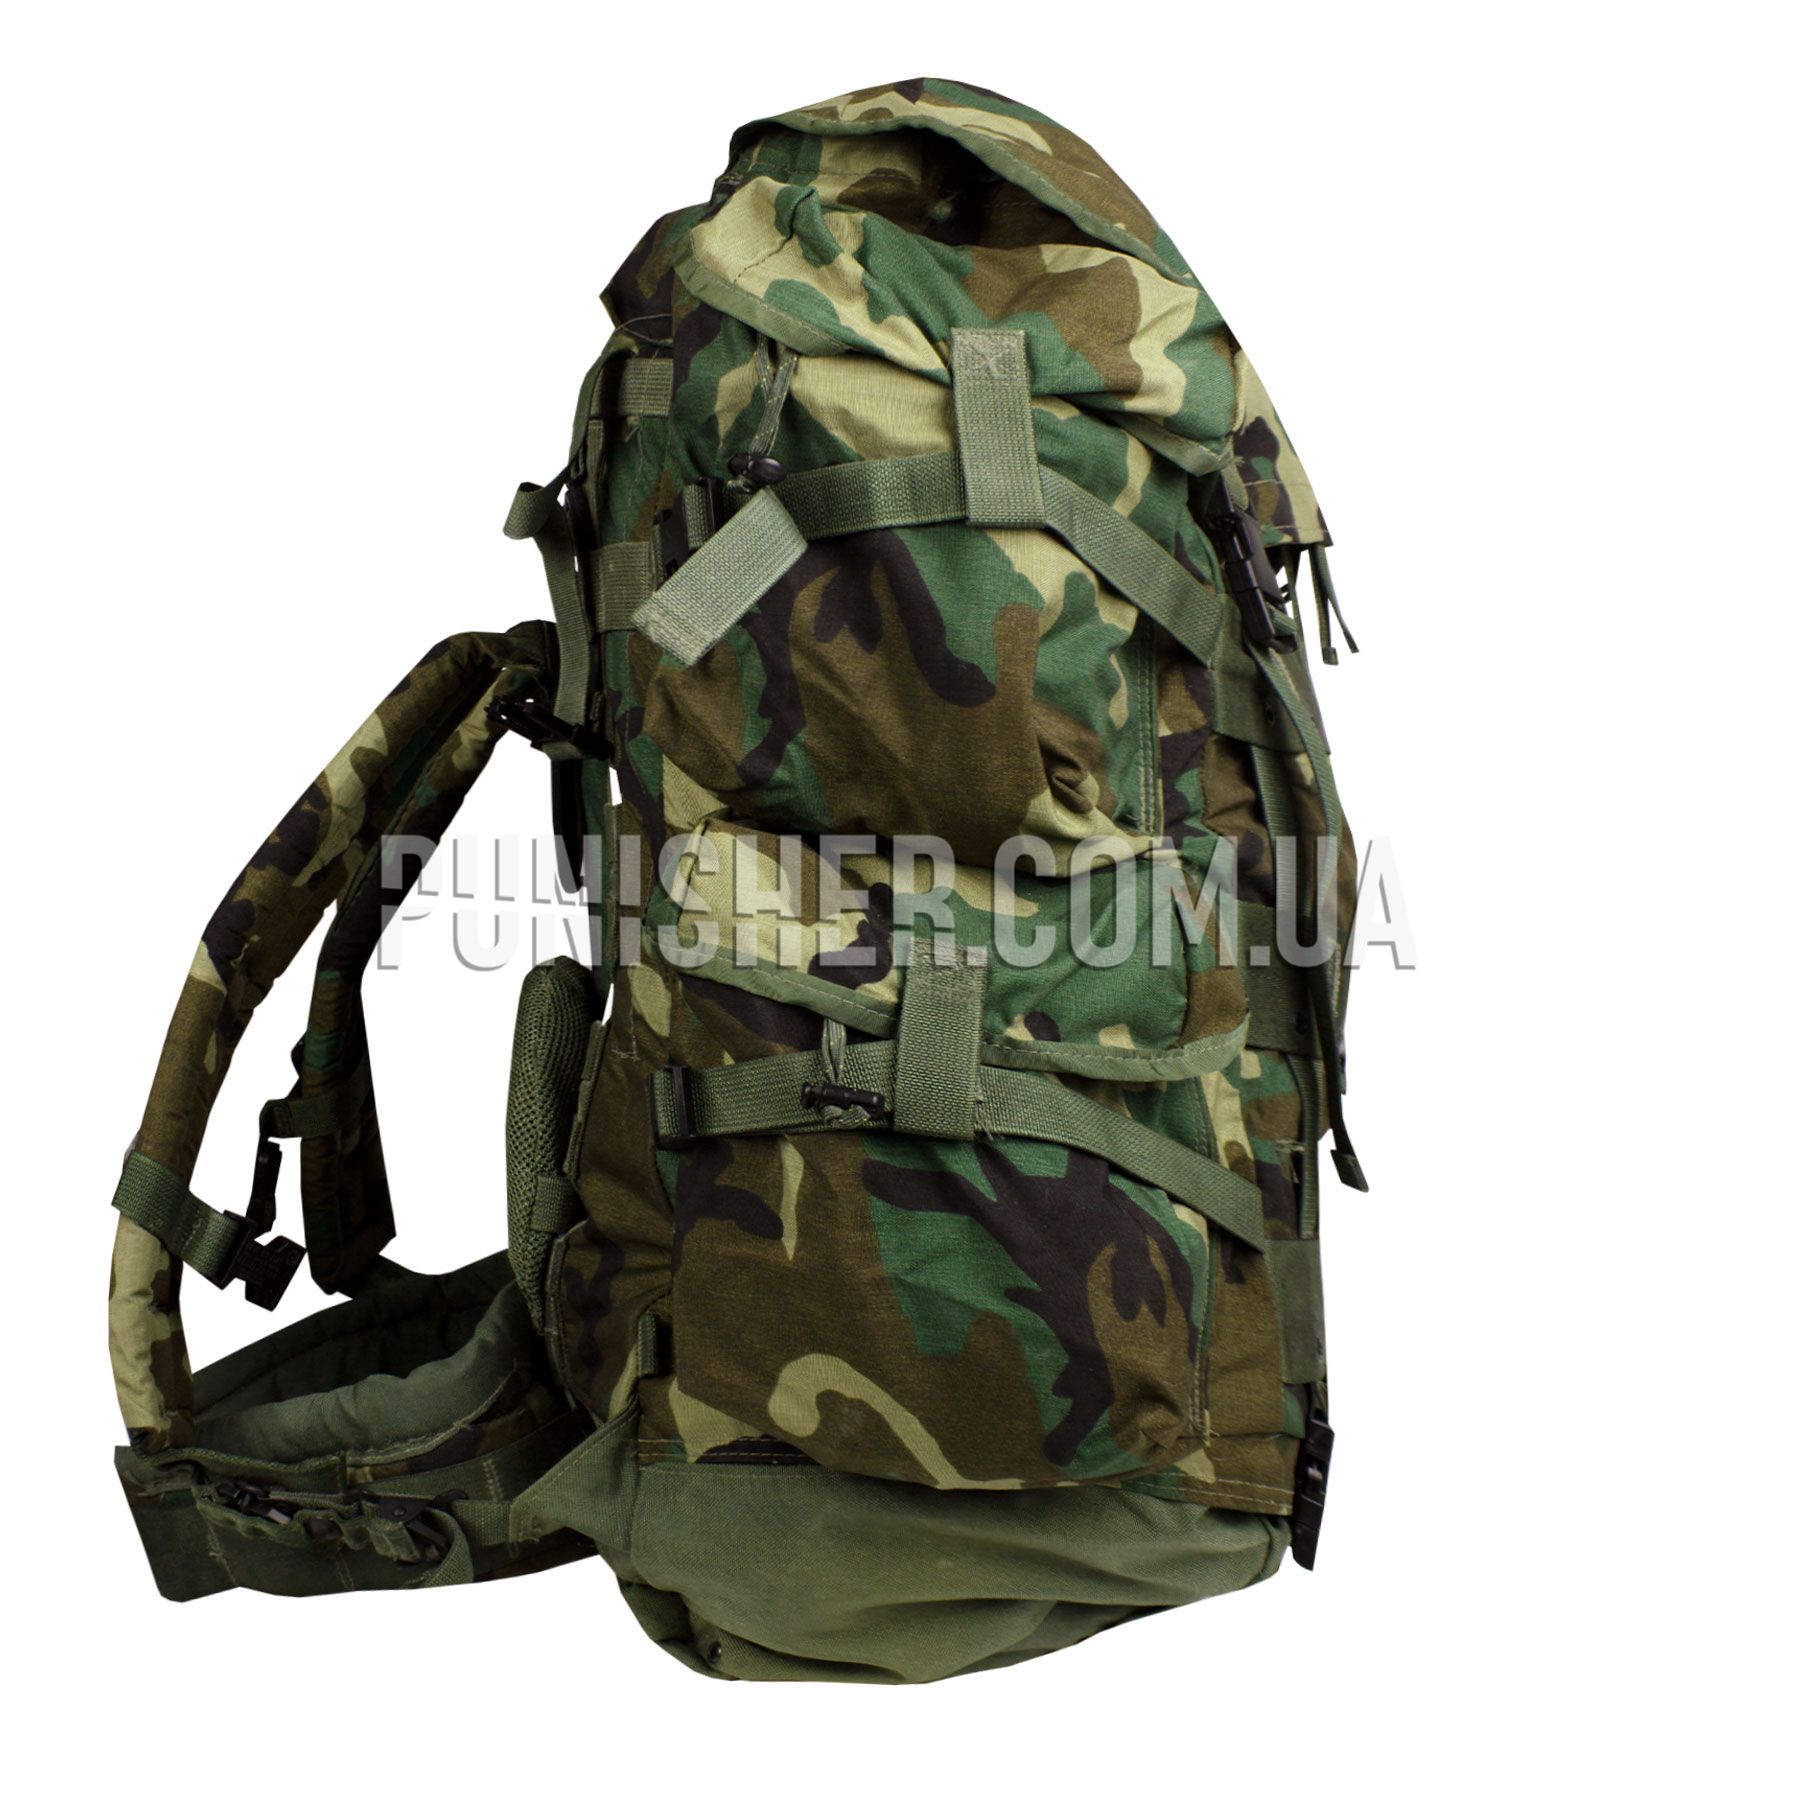 Large Field Pack Internal Frame with Combat Patrol Pack (Used)